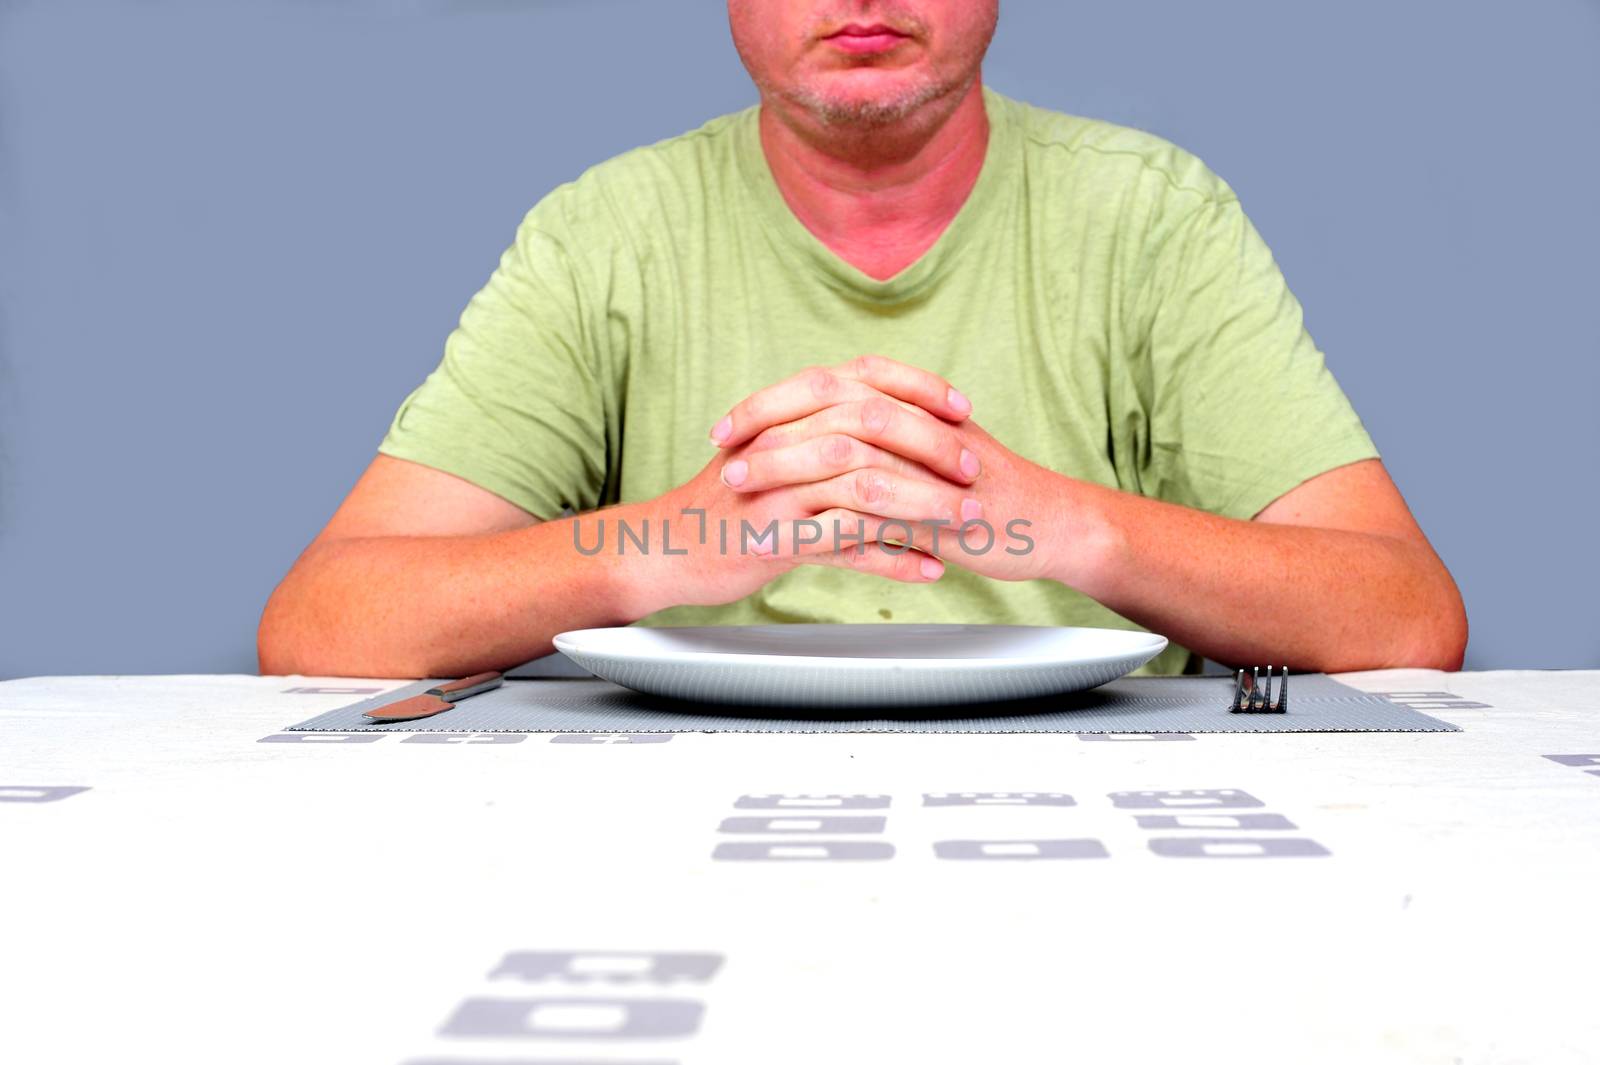 Gentleman waiting at a table waiting to eat alone